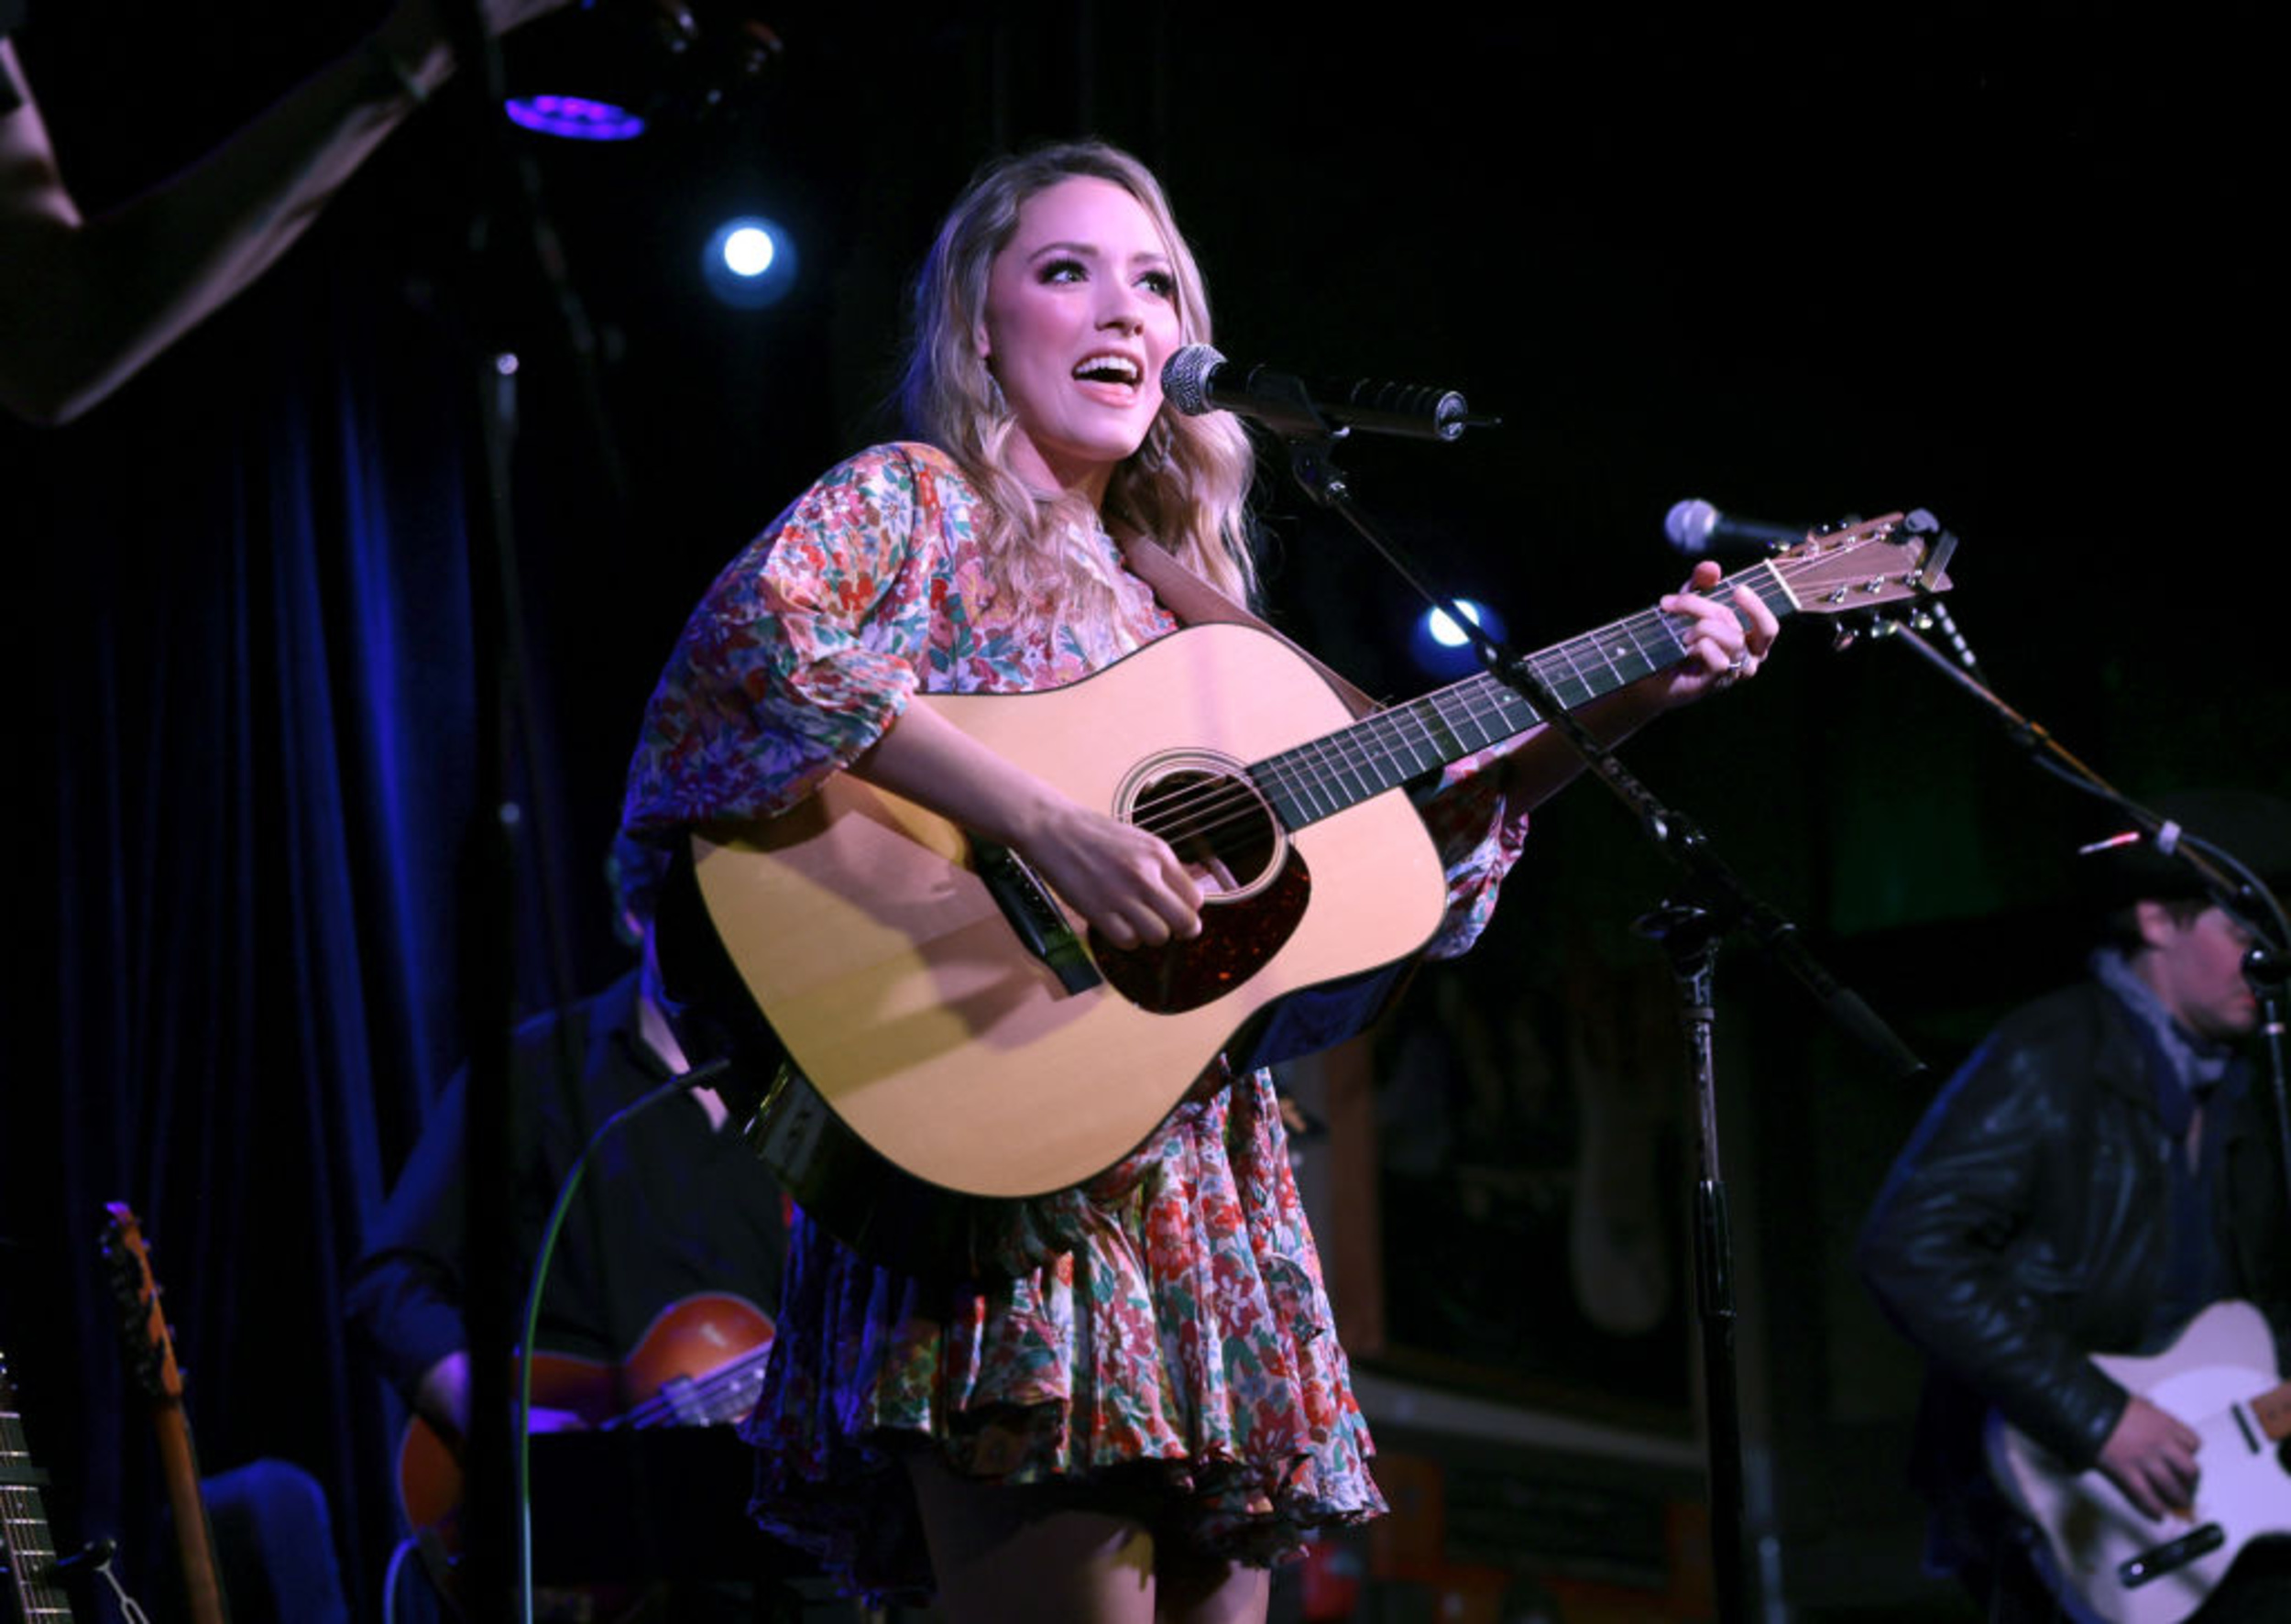 <p>Shepherded by Blake Shelton on "The Voice," Emily Ann Roberts doubles down on country twang in an era when pop reigns supreme. She released her first full-length album, "Can't Hide Country" in 2023, which featured a collaboration with icons Vince Gill and Ricky Skaggs. </p><p><a href='https://www.msn.com/en-us/community/channel/vid-cj9pqbr0vn9in2b6ddcd8sfgpfq6x6utp44fssrv6mc2gtybw0us'>Follow us on MSN to see more of our exclusive entertainment content.</a></p>